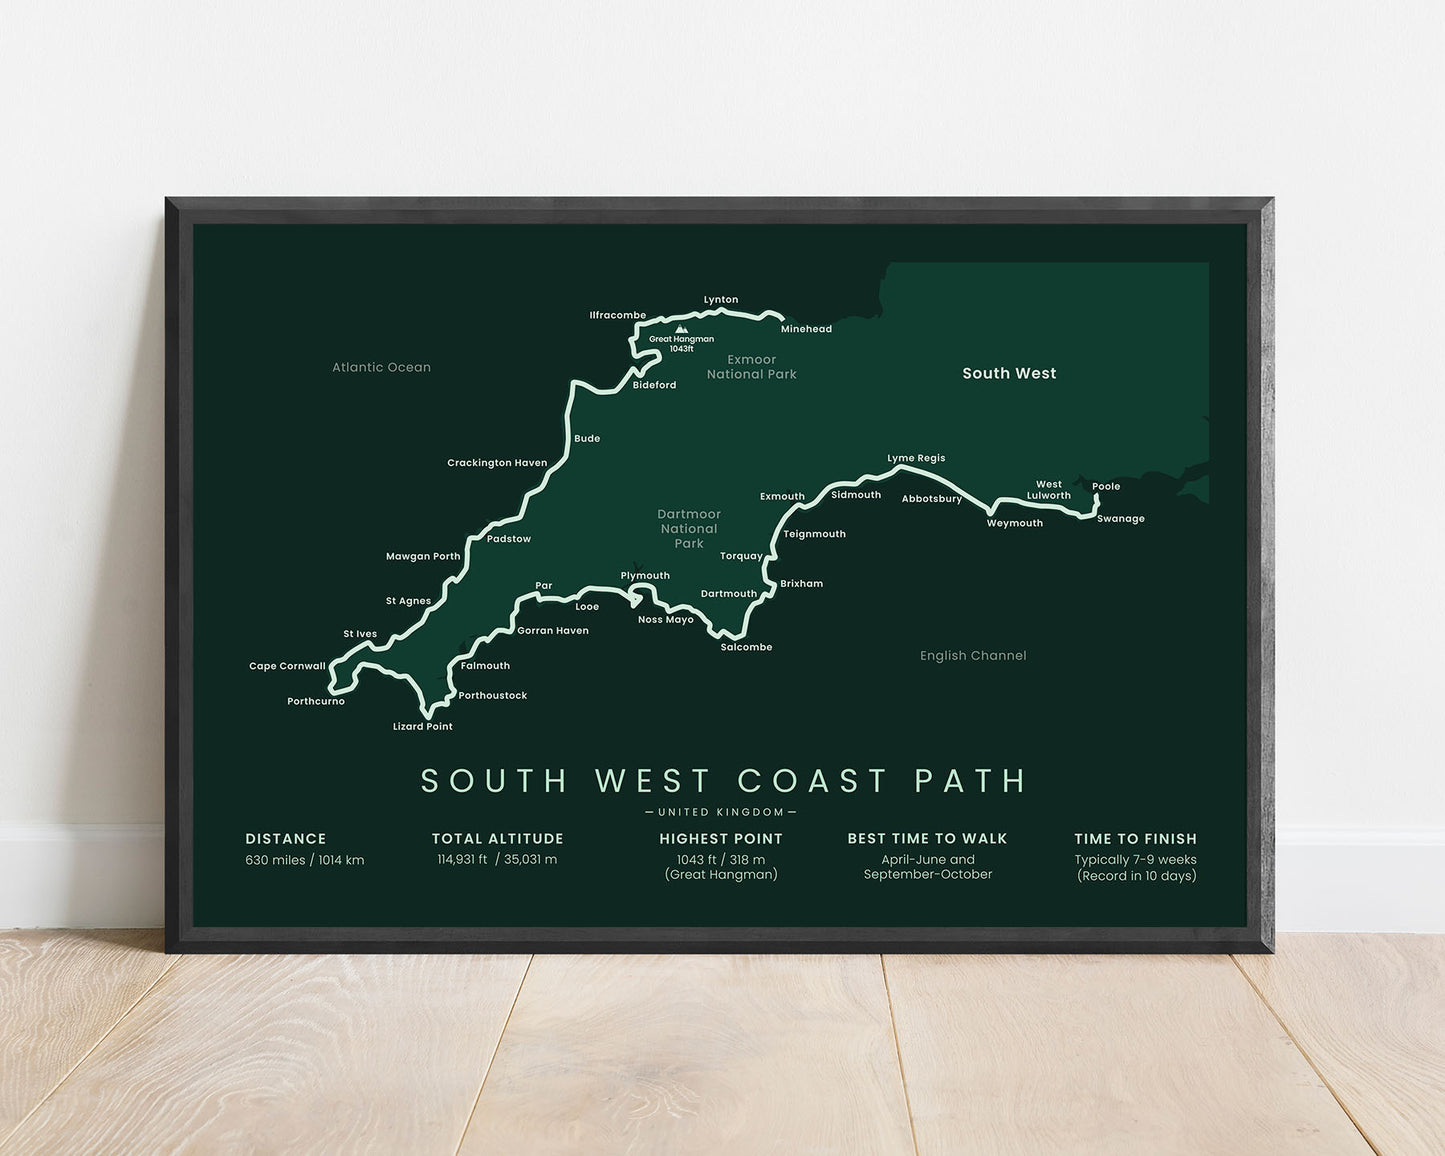 South West Coast Path wall map with green background (Devon)